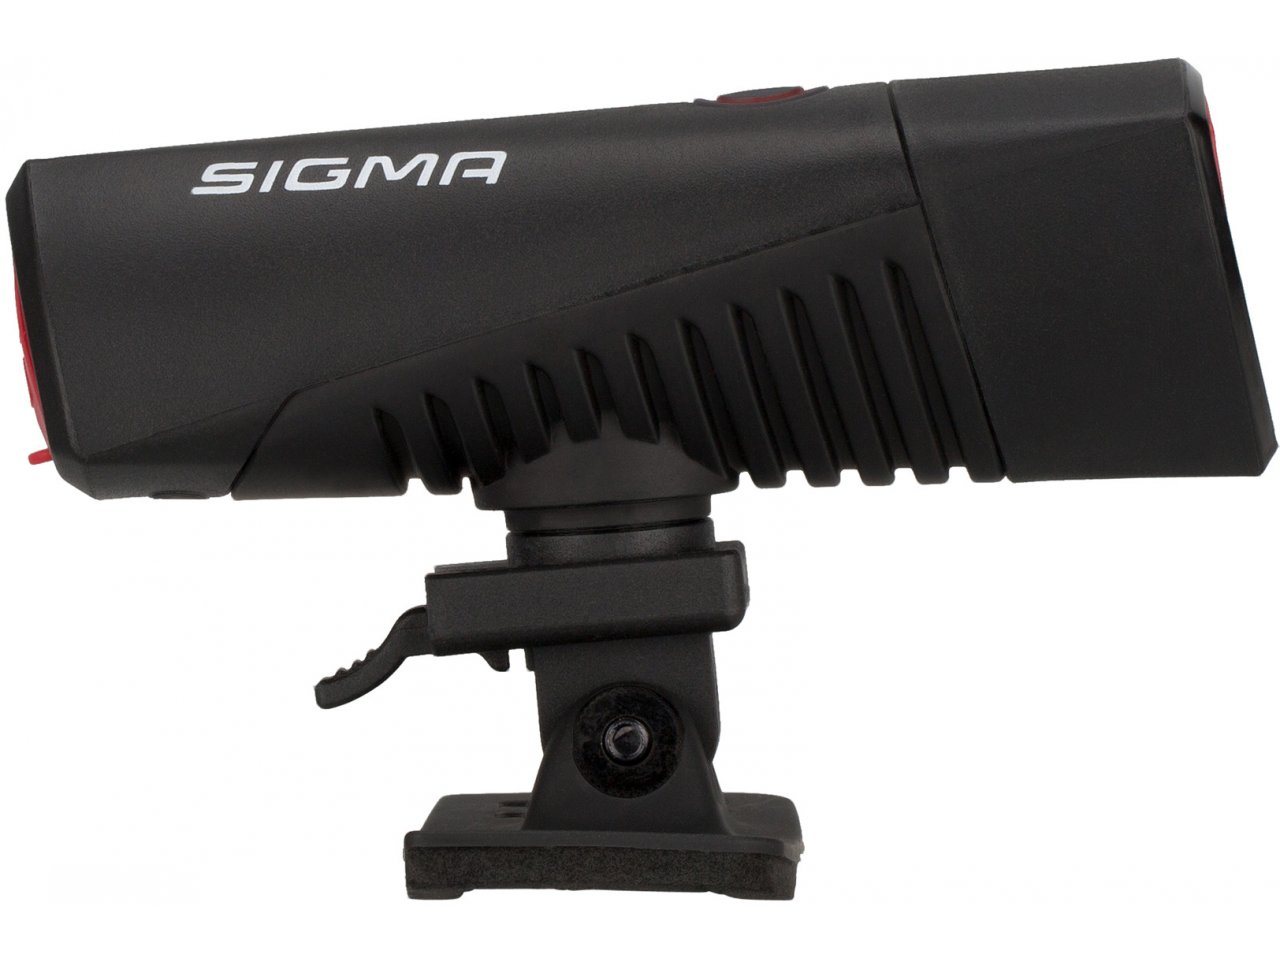 Sigma Buster 700 Lights - Cyclop.in